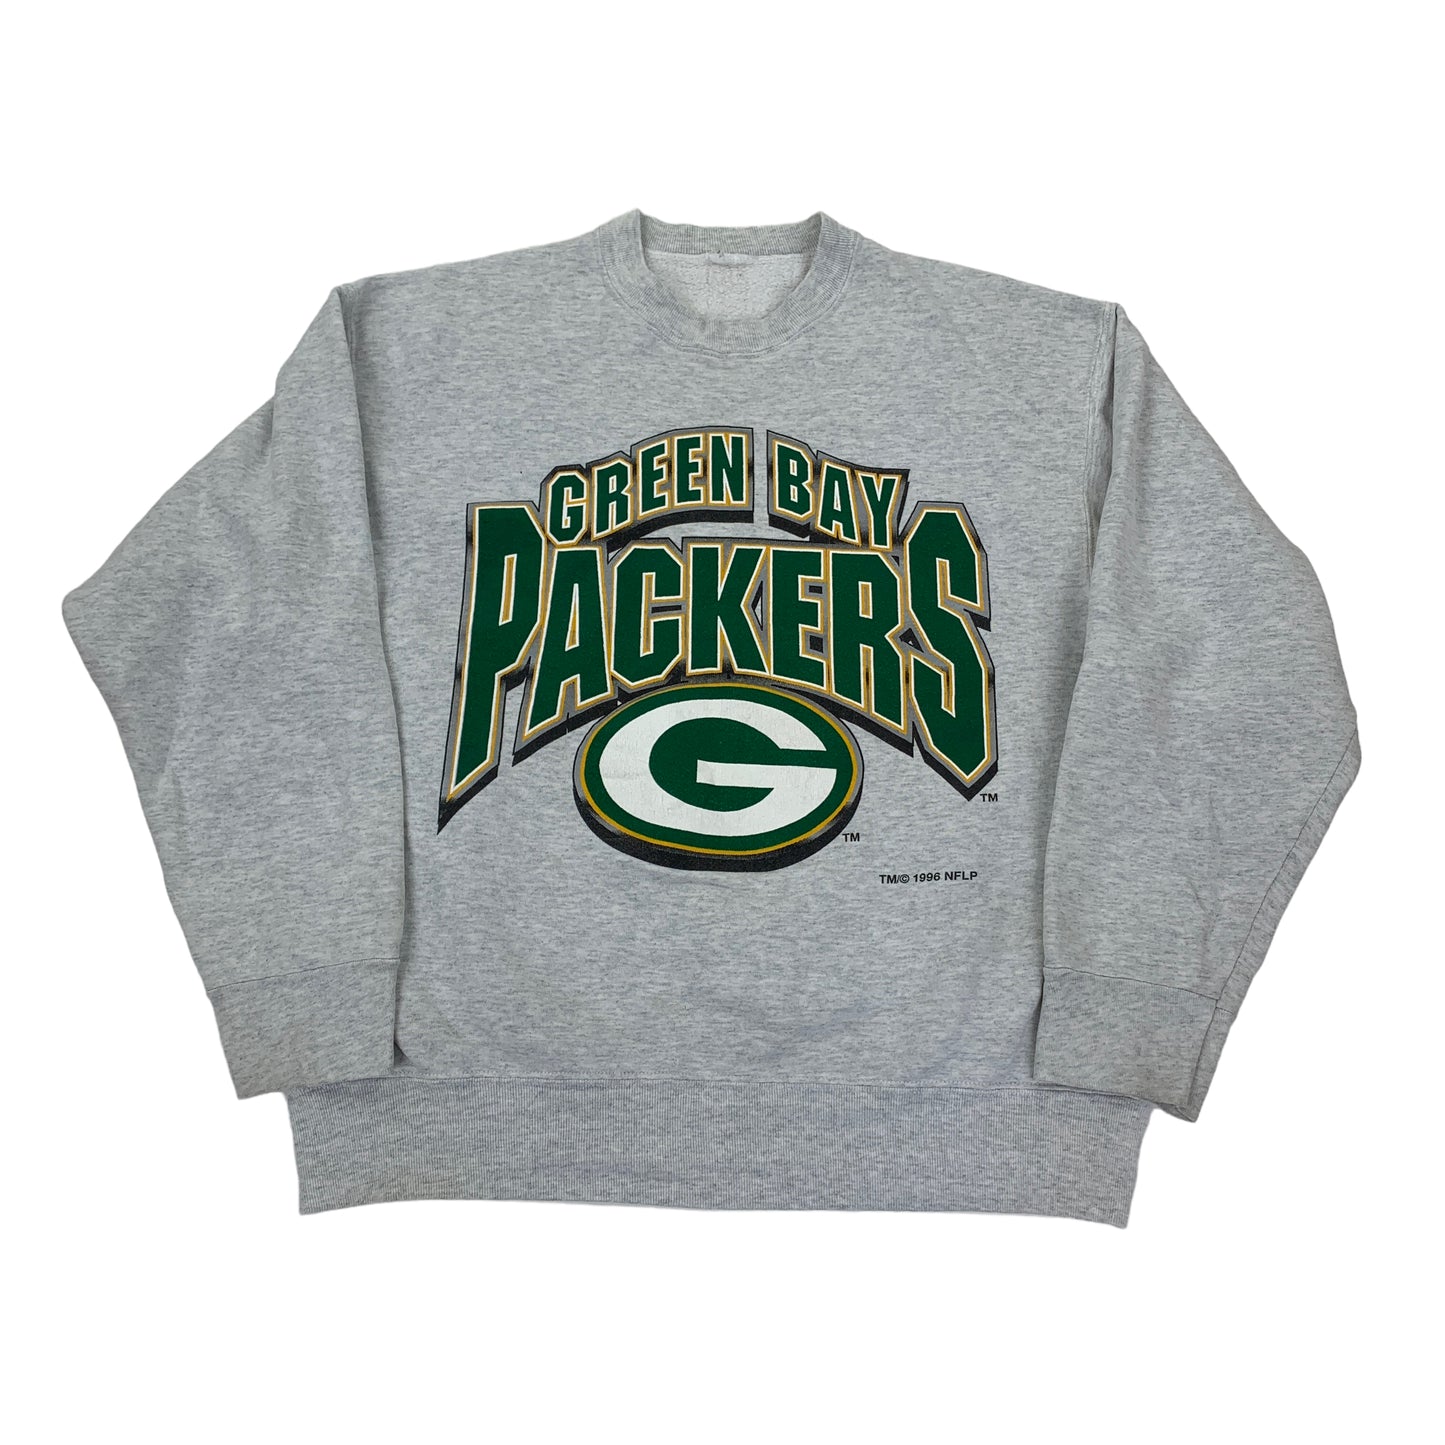 Greenbay Packers Sweater 1996 NFL - S